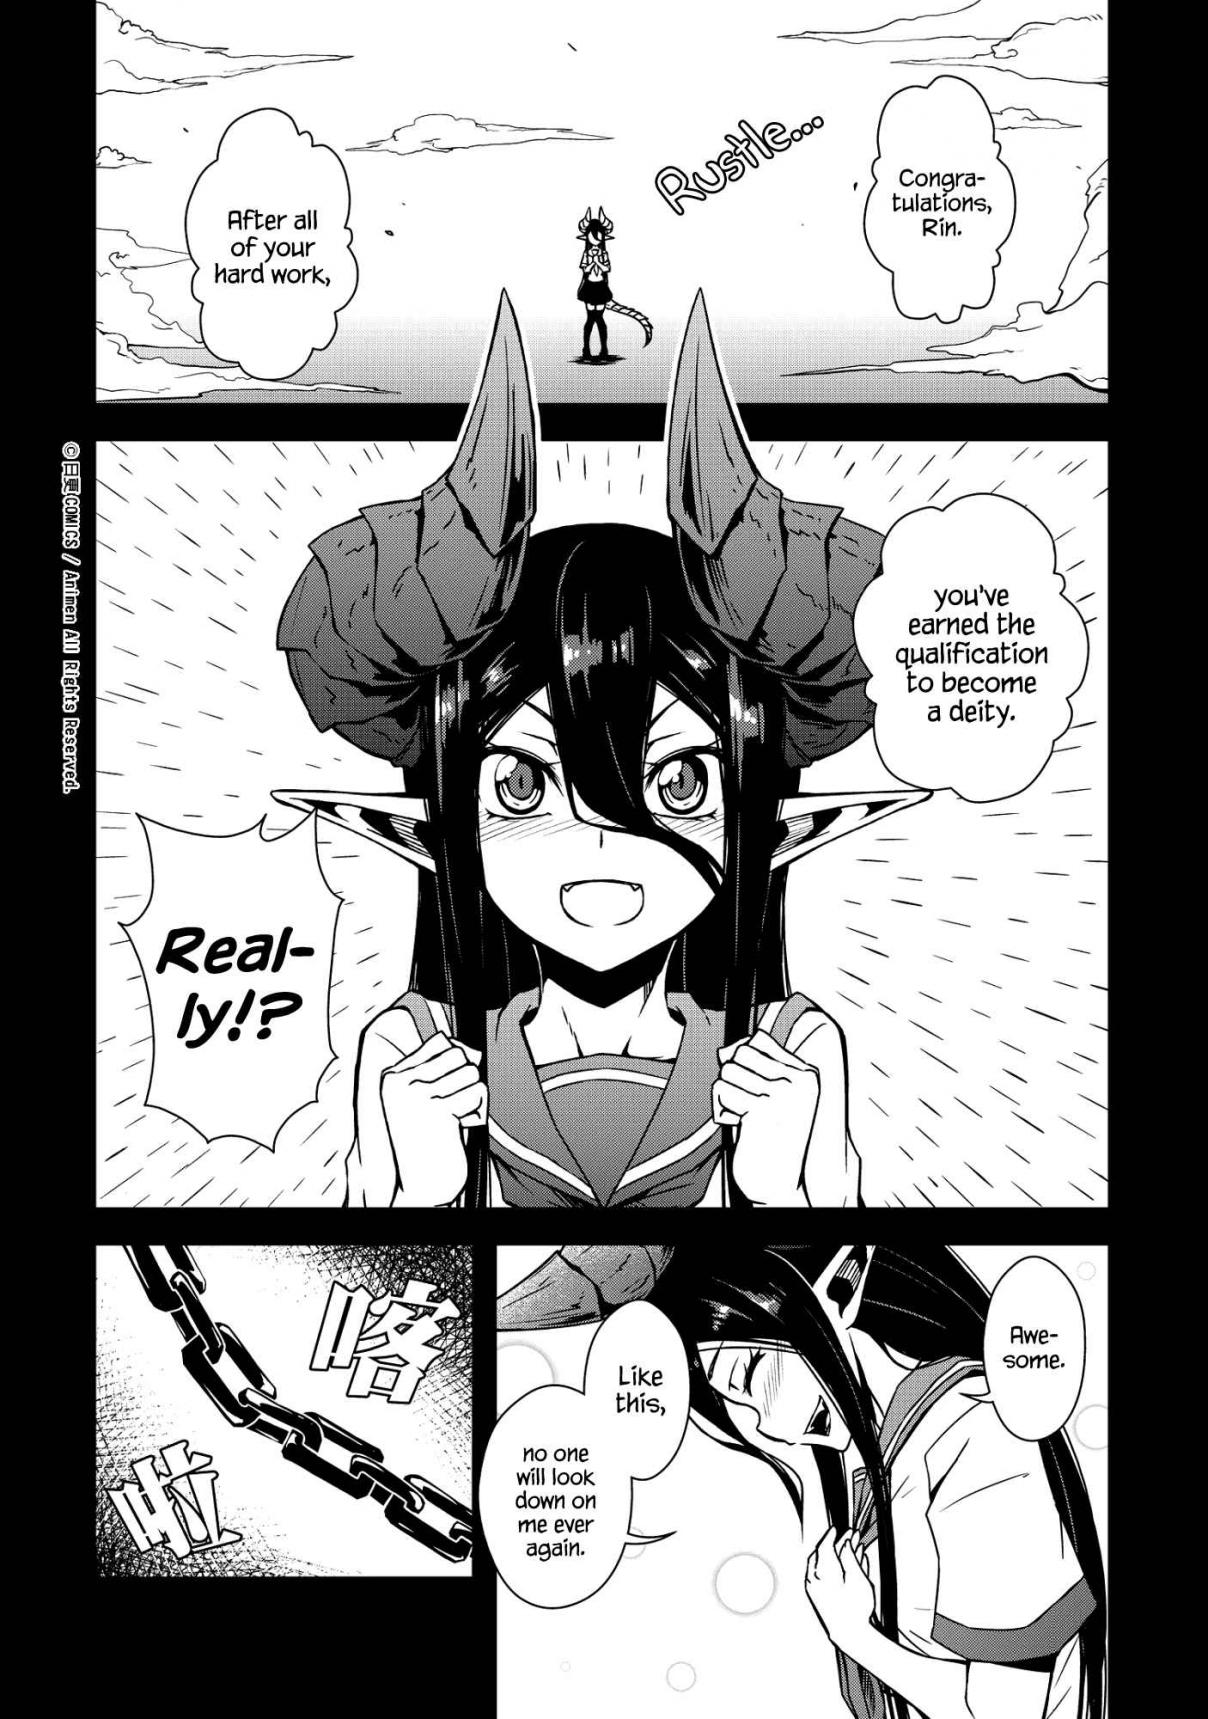 The Girl With Horns Vol. 1 Ch. 2 Cat and Mouse